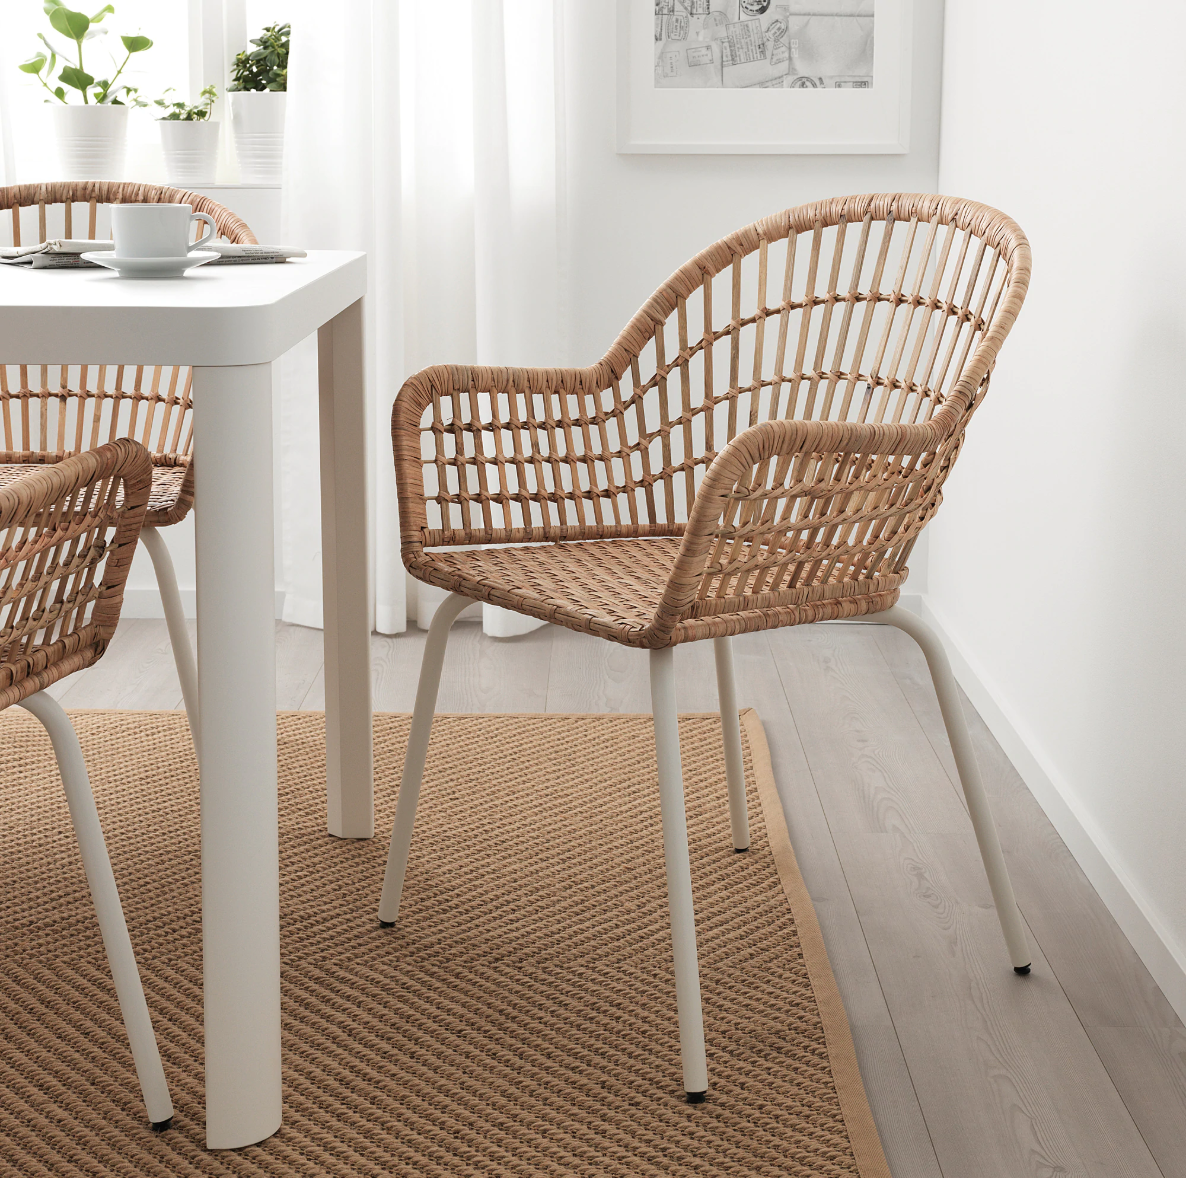 10 Best Ikea Kitchen Tables And Dining, Round Table With Four Chairs Ikea